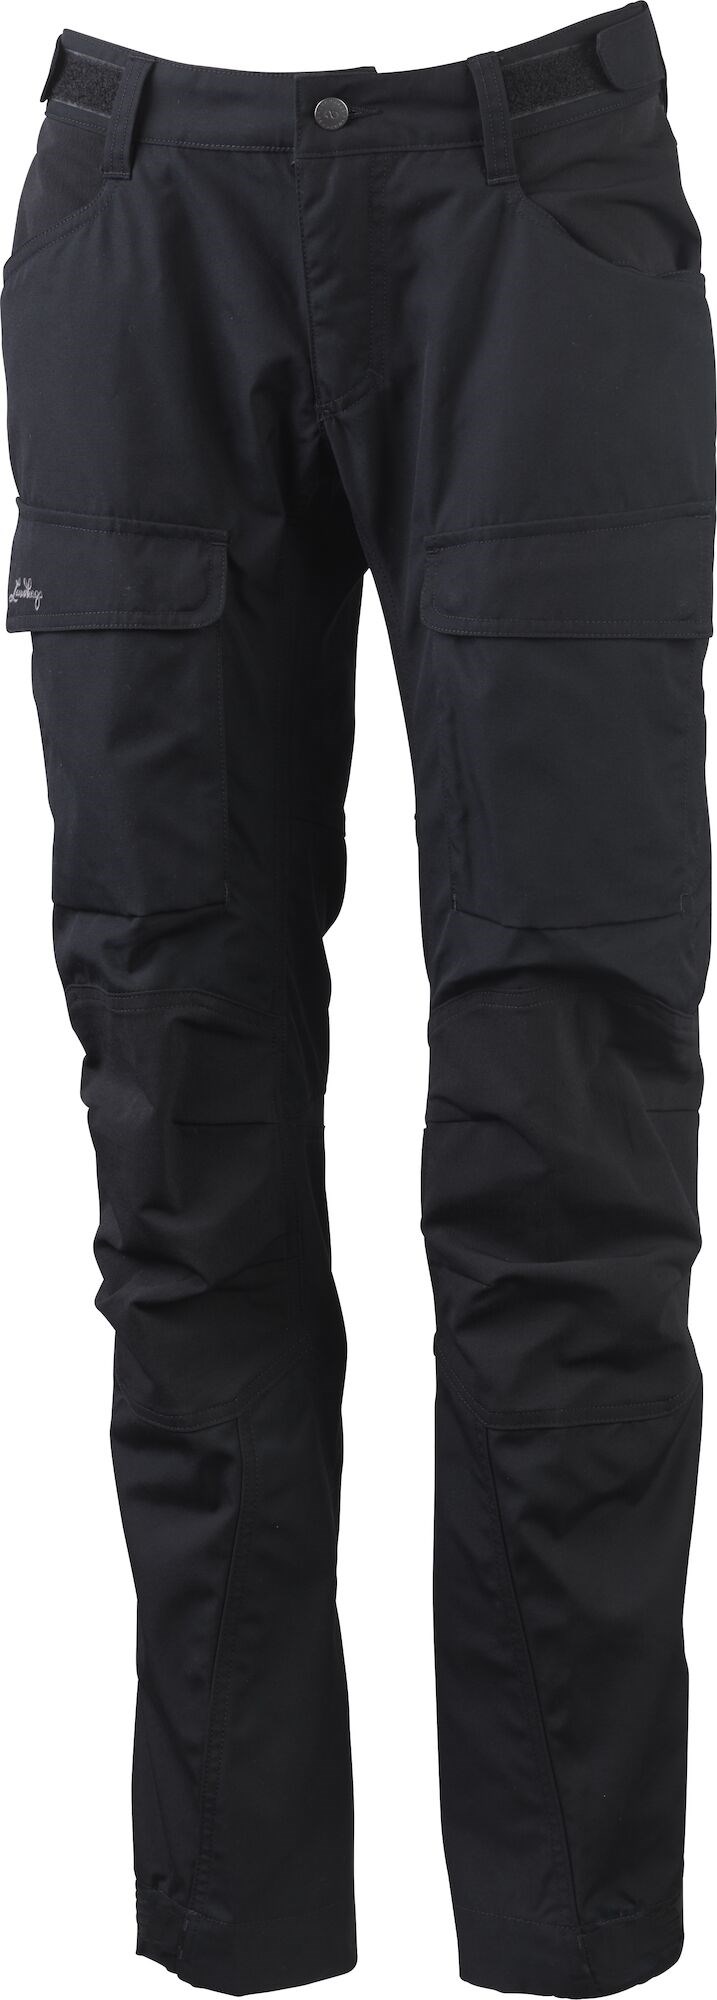 Lundhags "Authentic II Ws Pant" - black